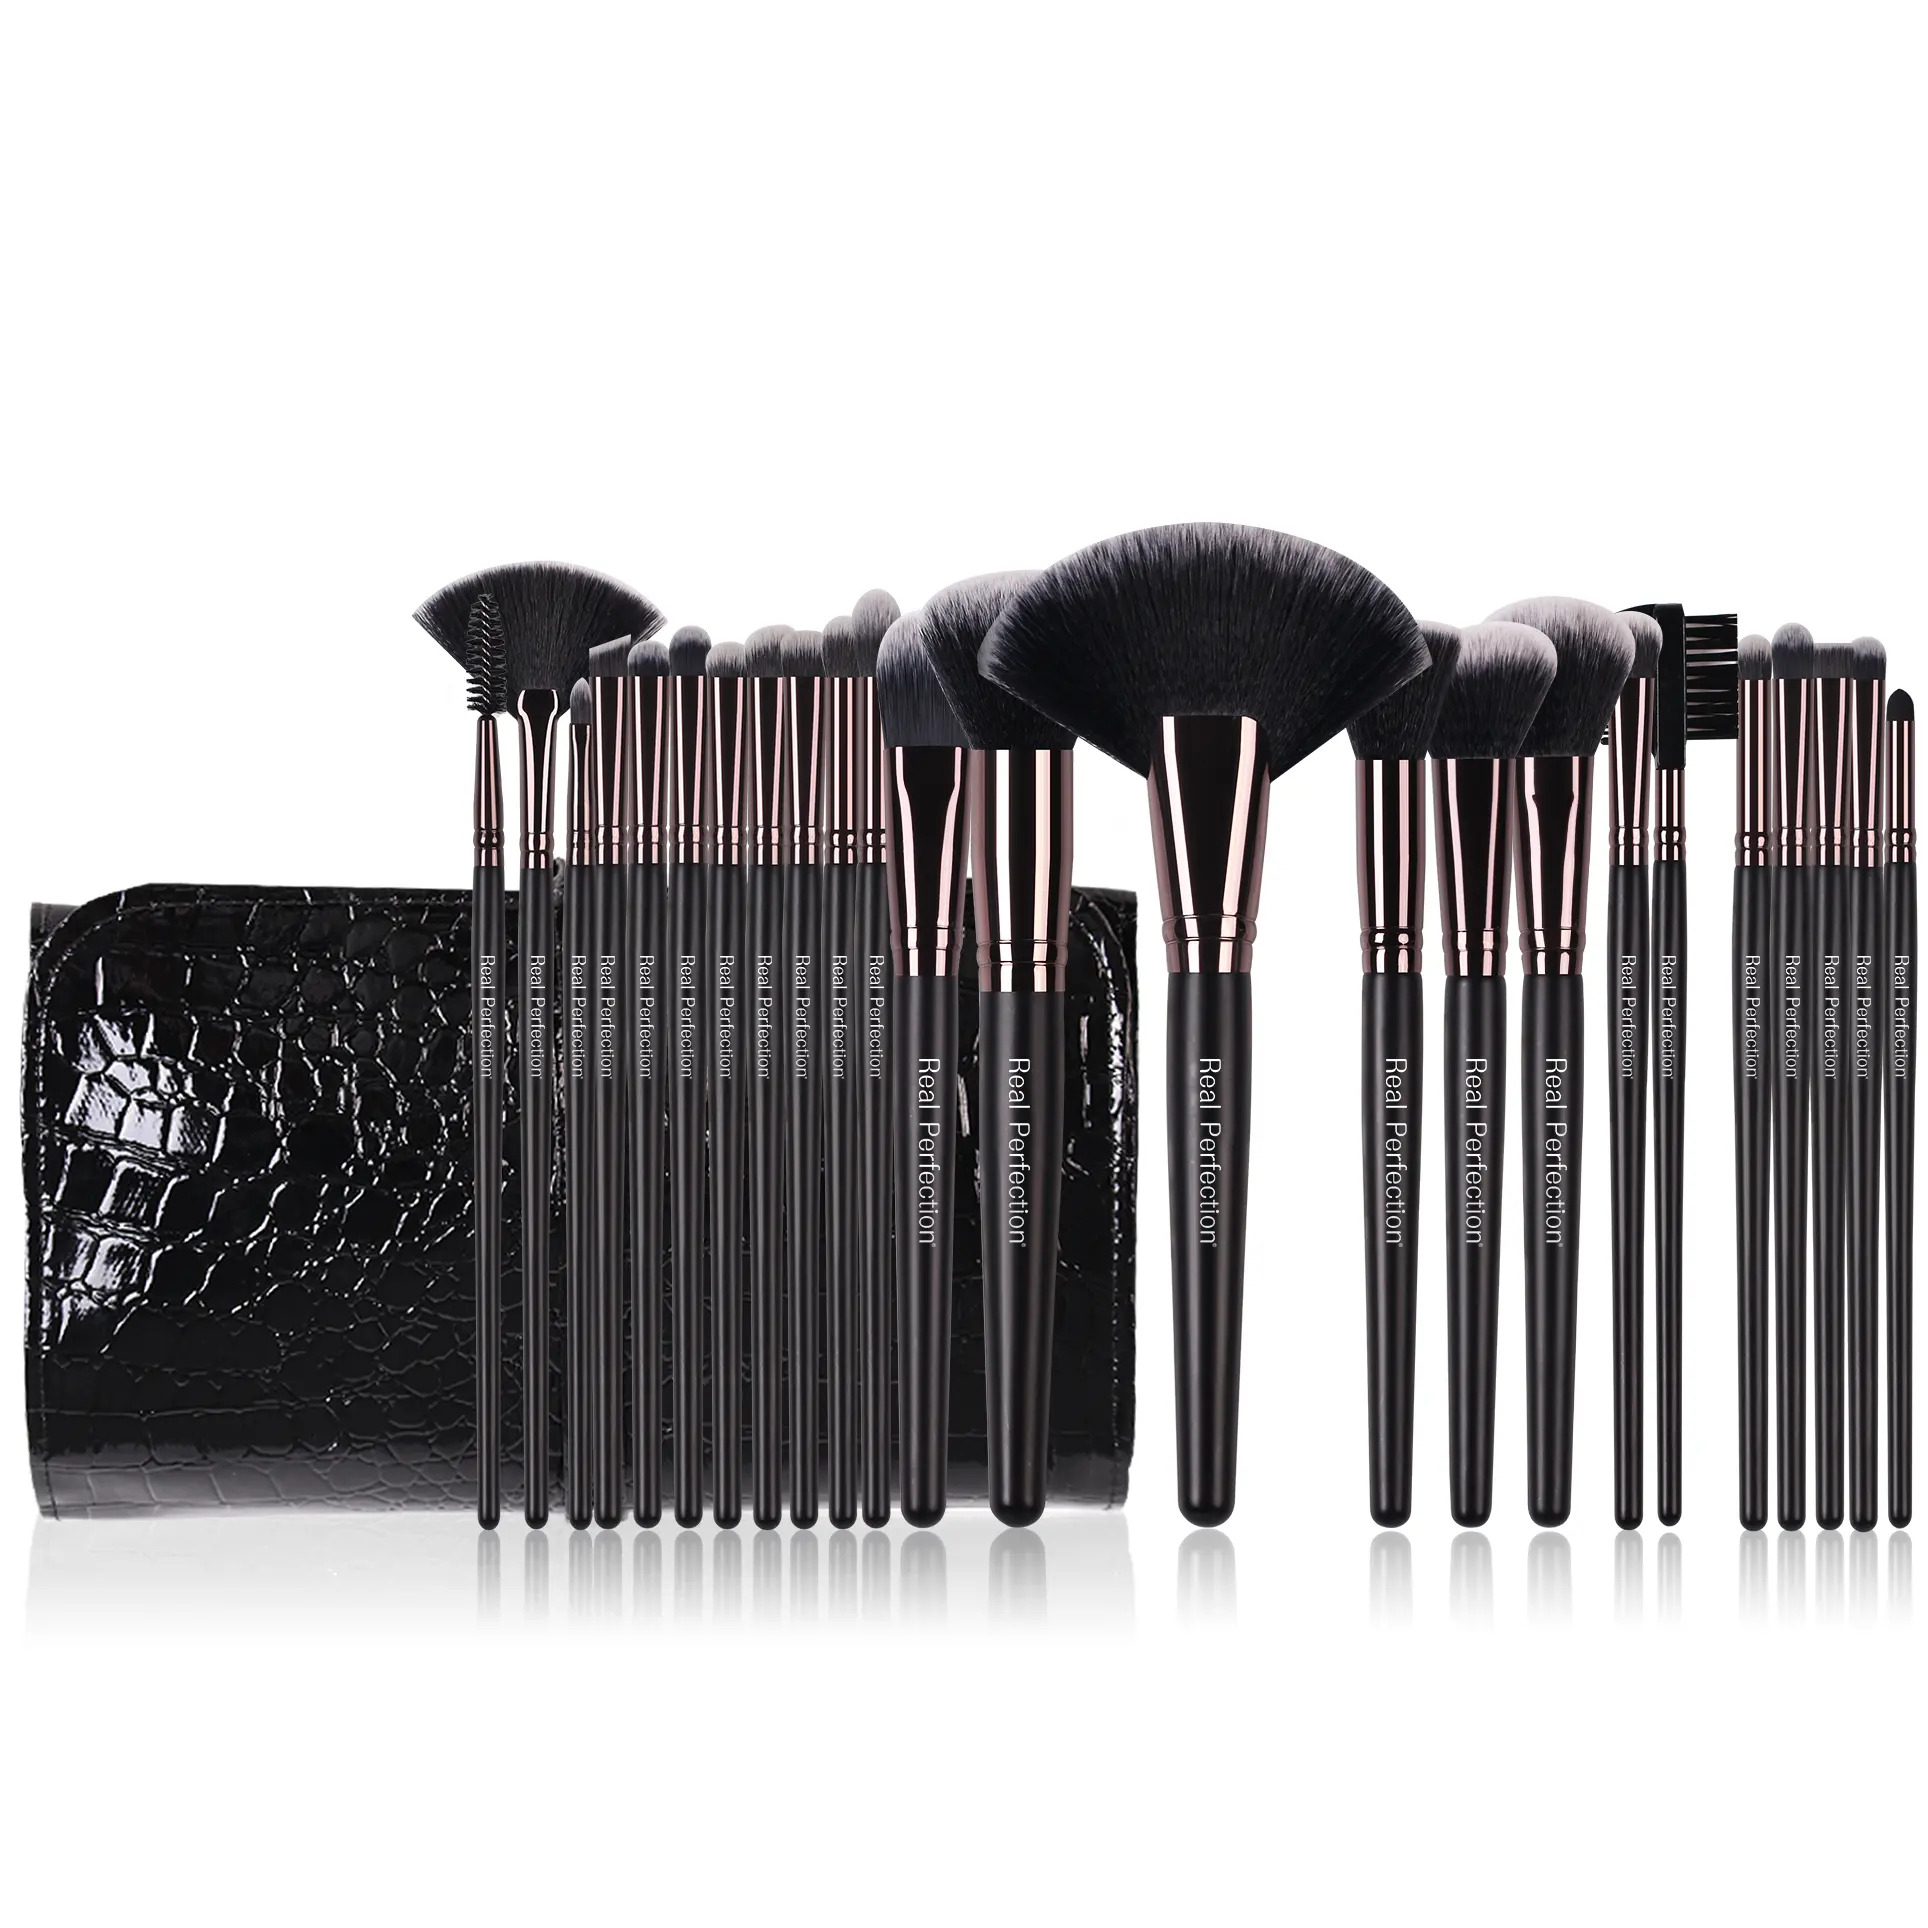 RP High Quality Low Price Single Black Make up Brush Professional Customized Private Brand Makeup Brush Set